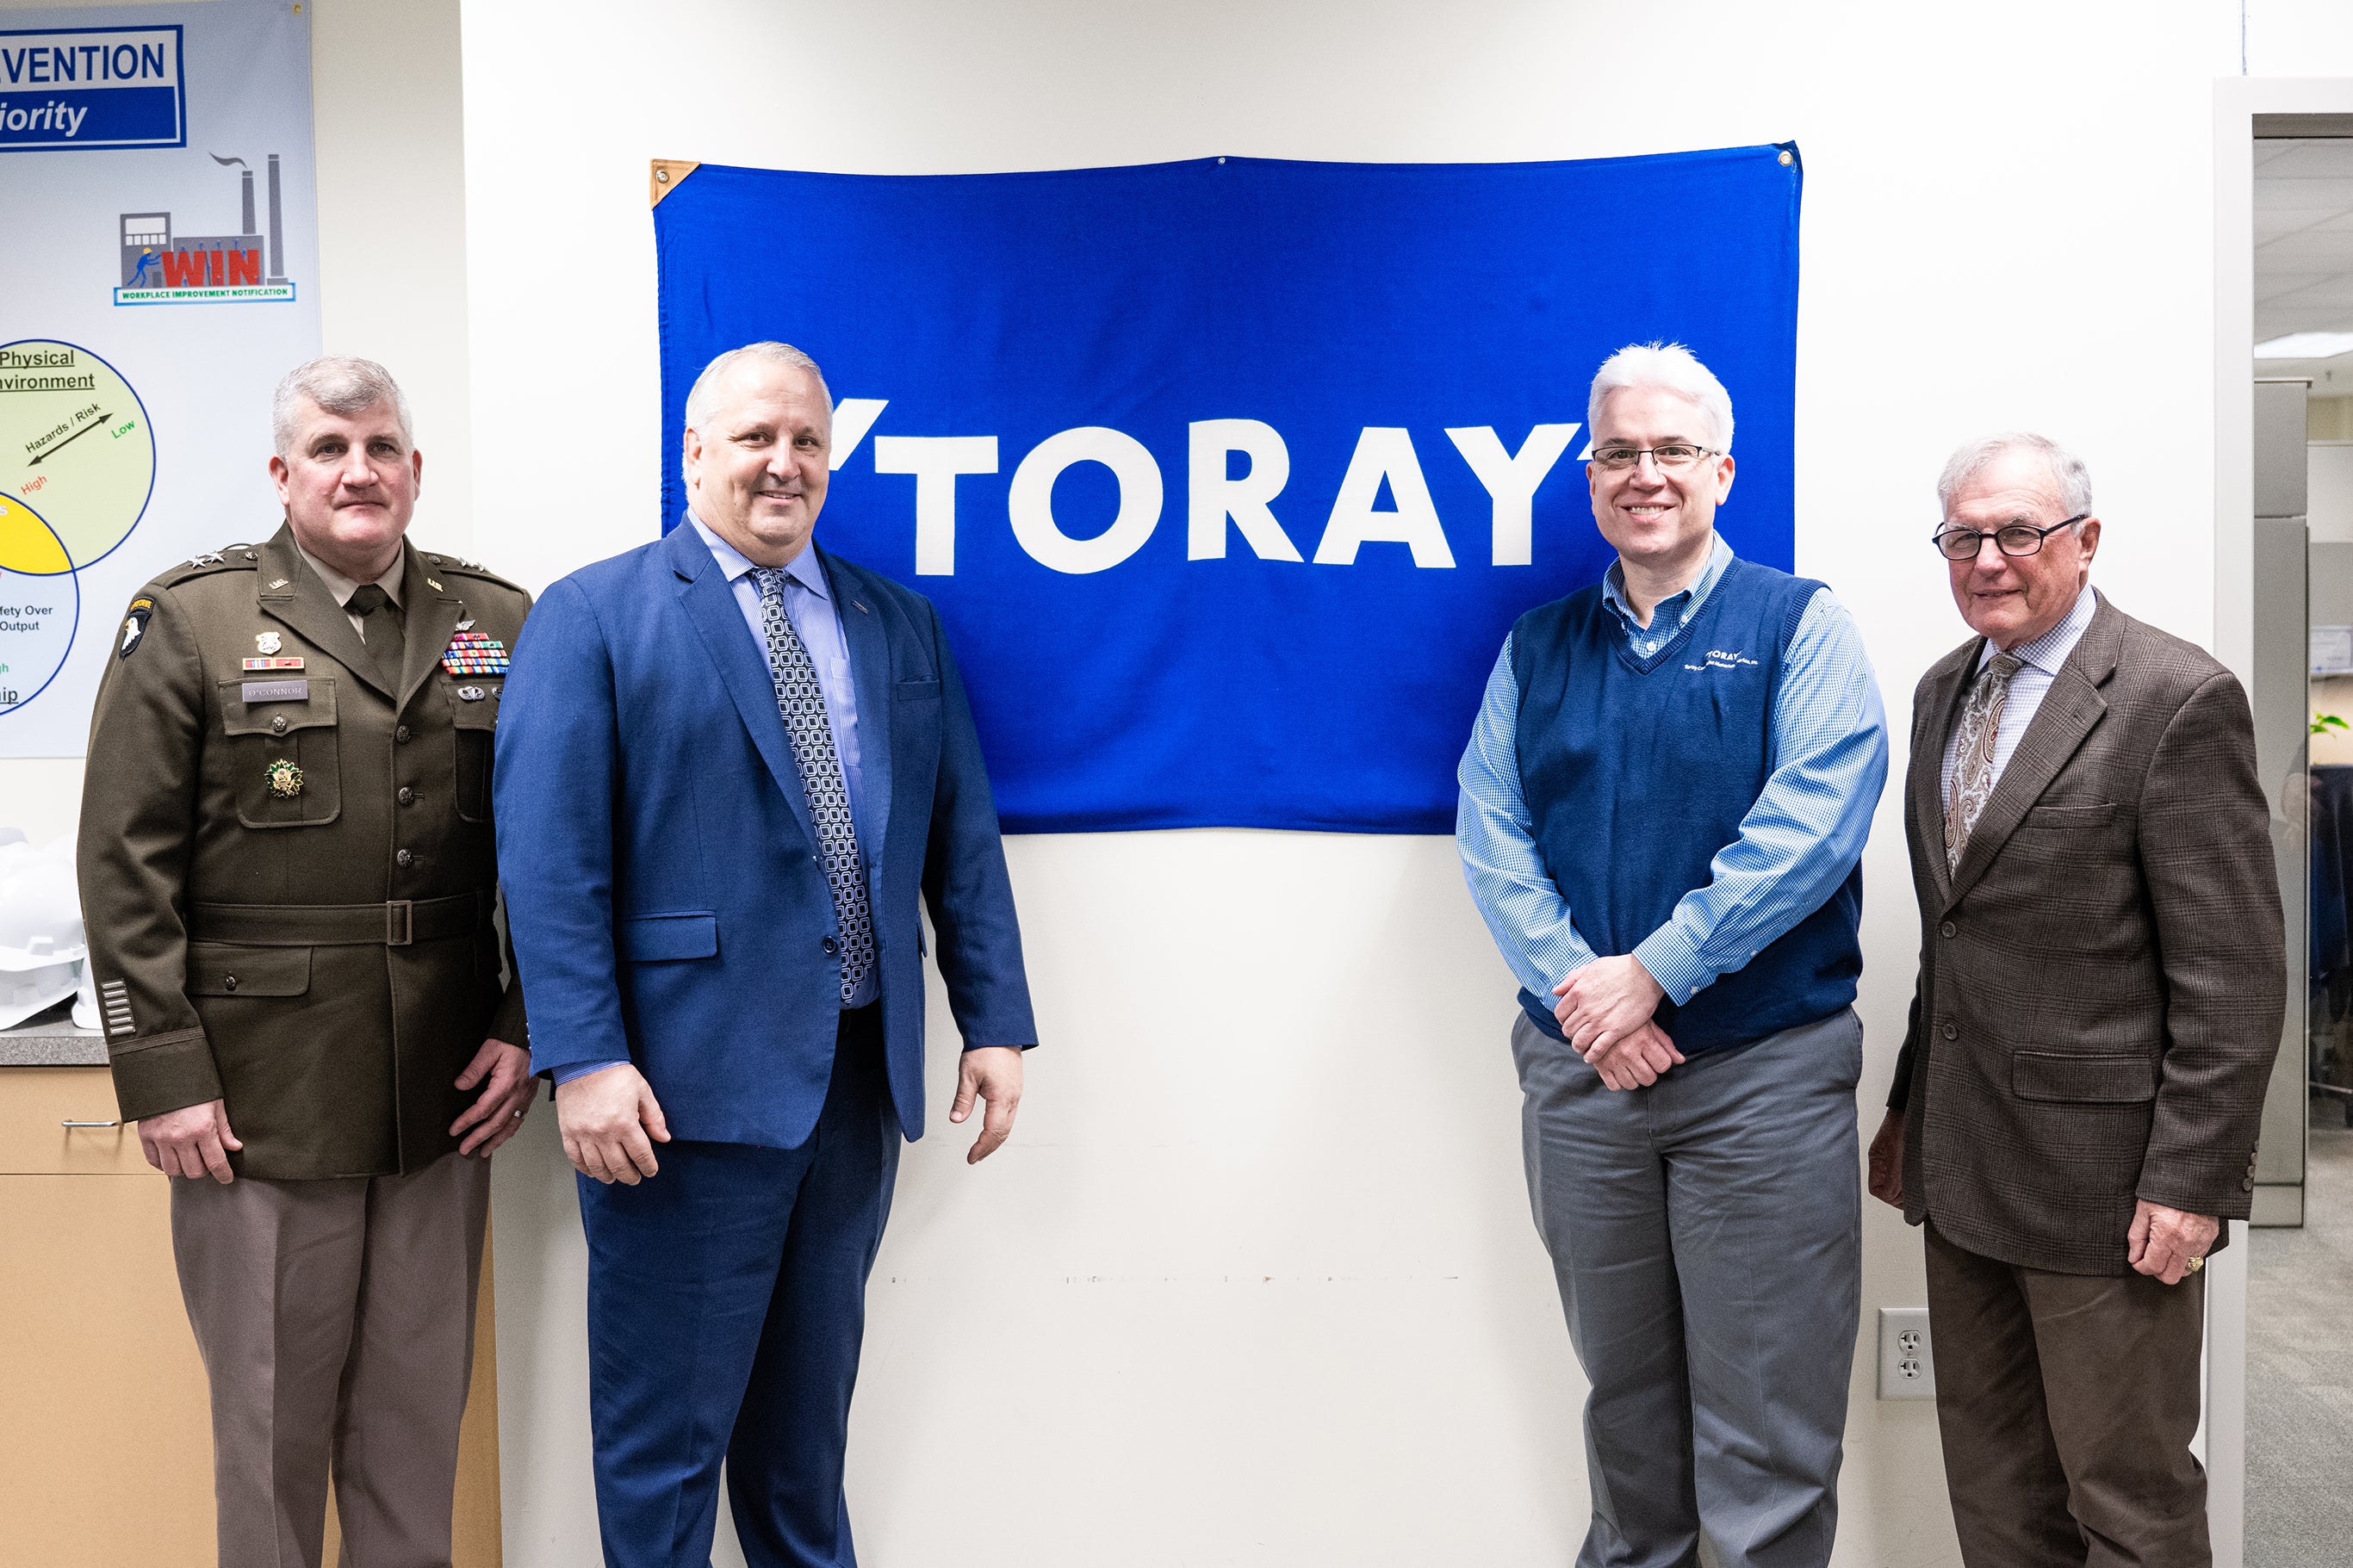 Toray Celebrates the Commissioning of Expanded TORAYCA™ T1100 Production Capacity at its Decatur, Alabama Carbon Fiber Plant 1